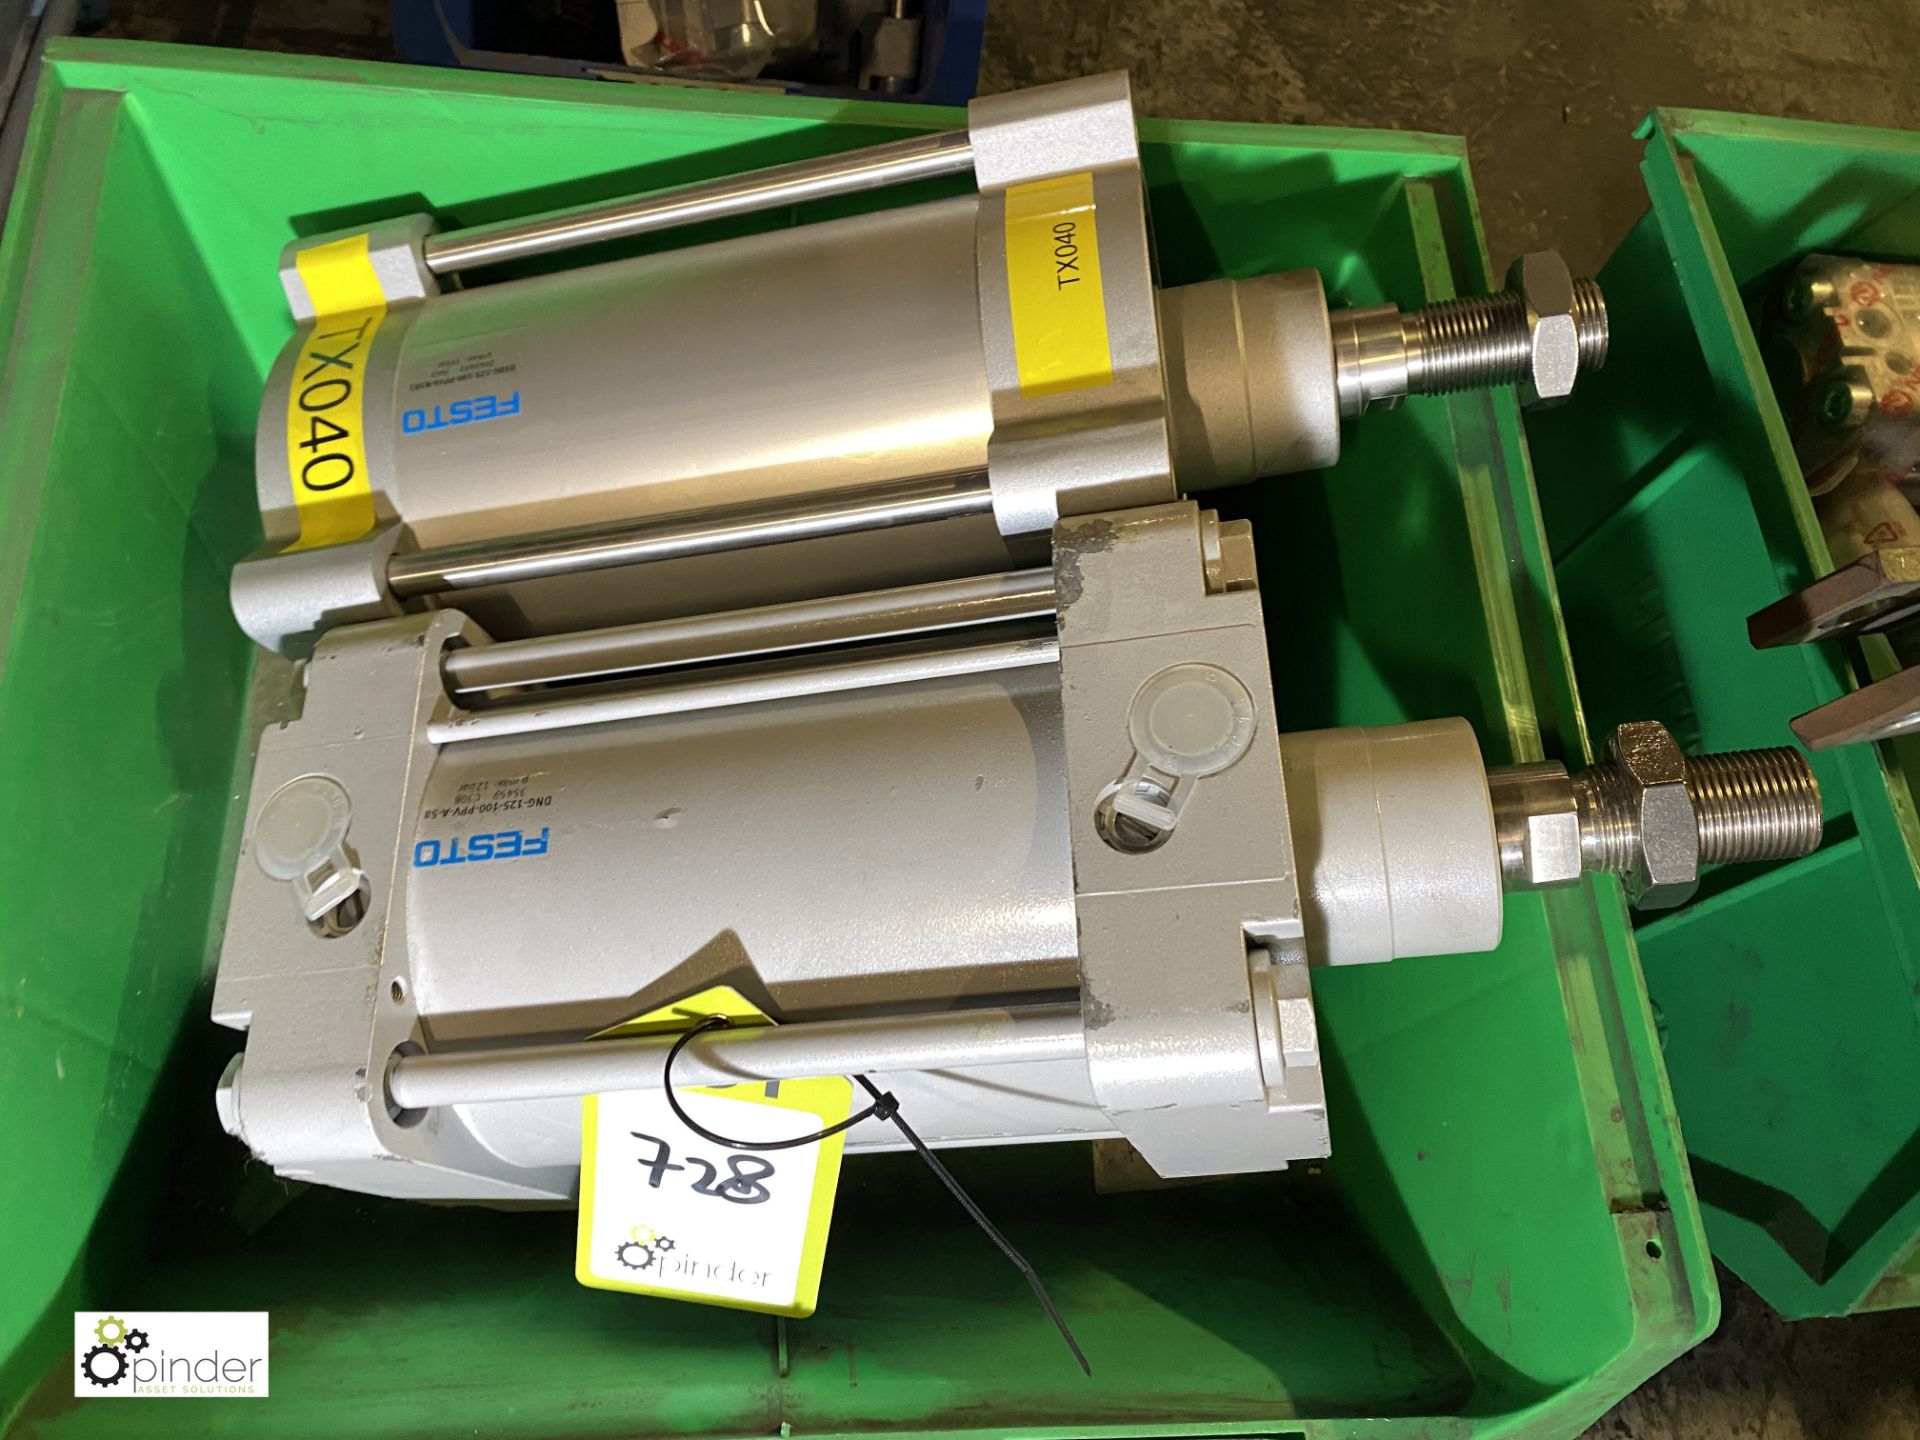 2 Festo DNG-125-100-PPV-A pneumatic Cylinders (please note there is a lift out fee of £5 plus VAT on